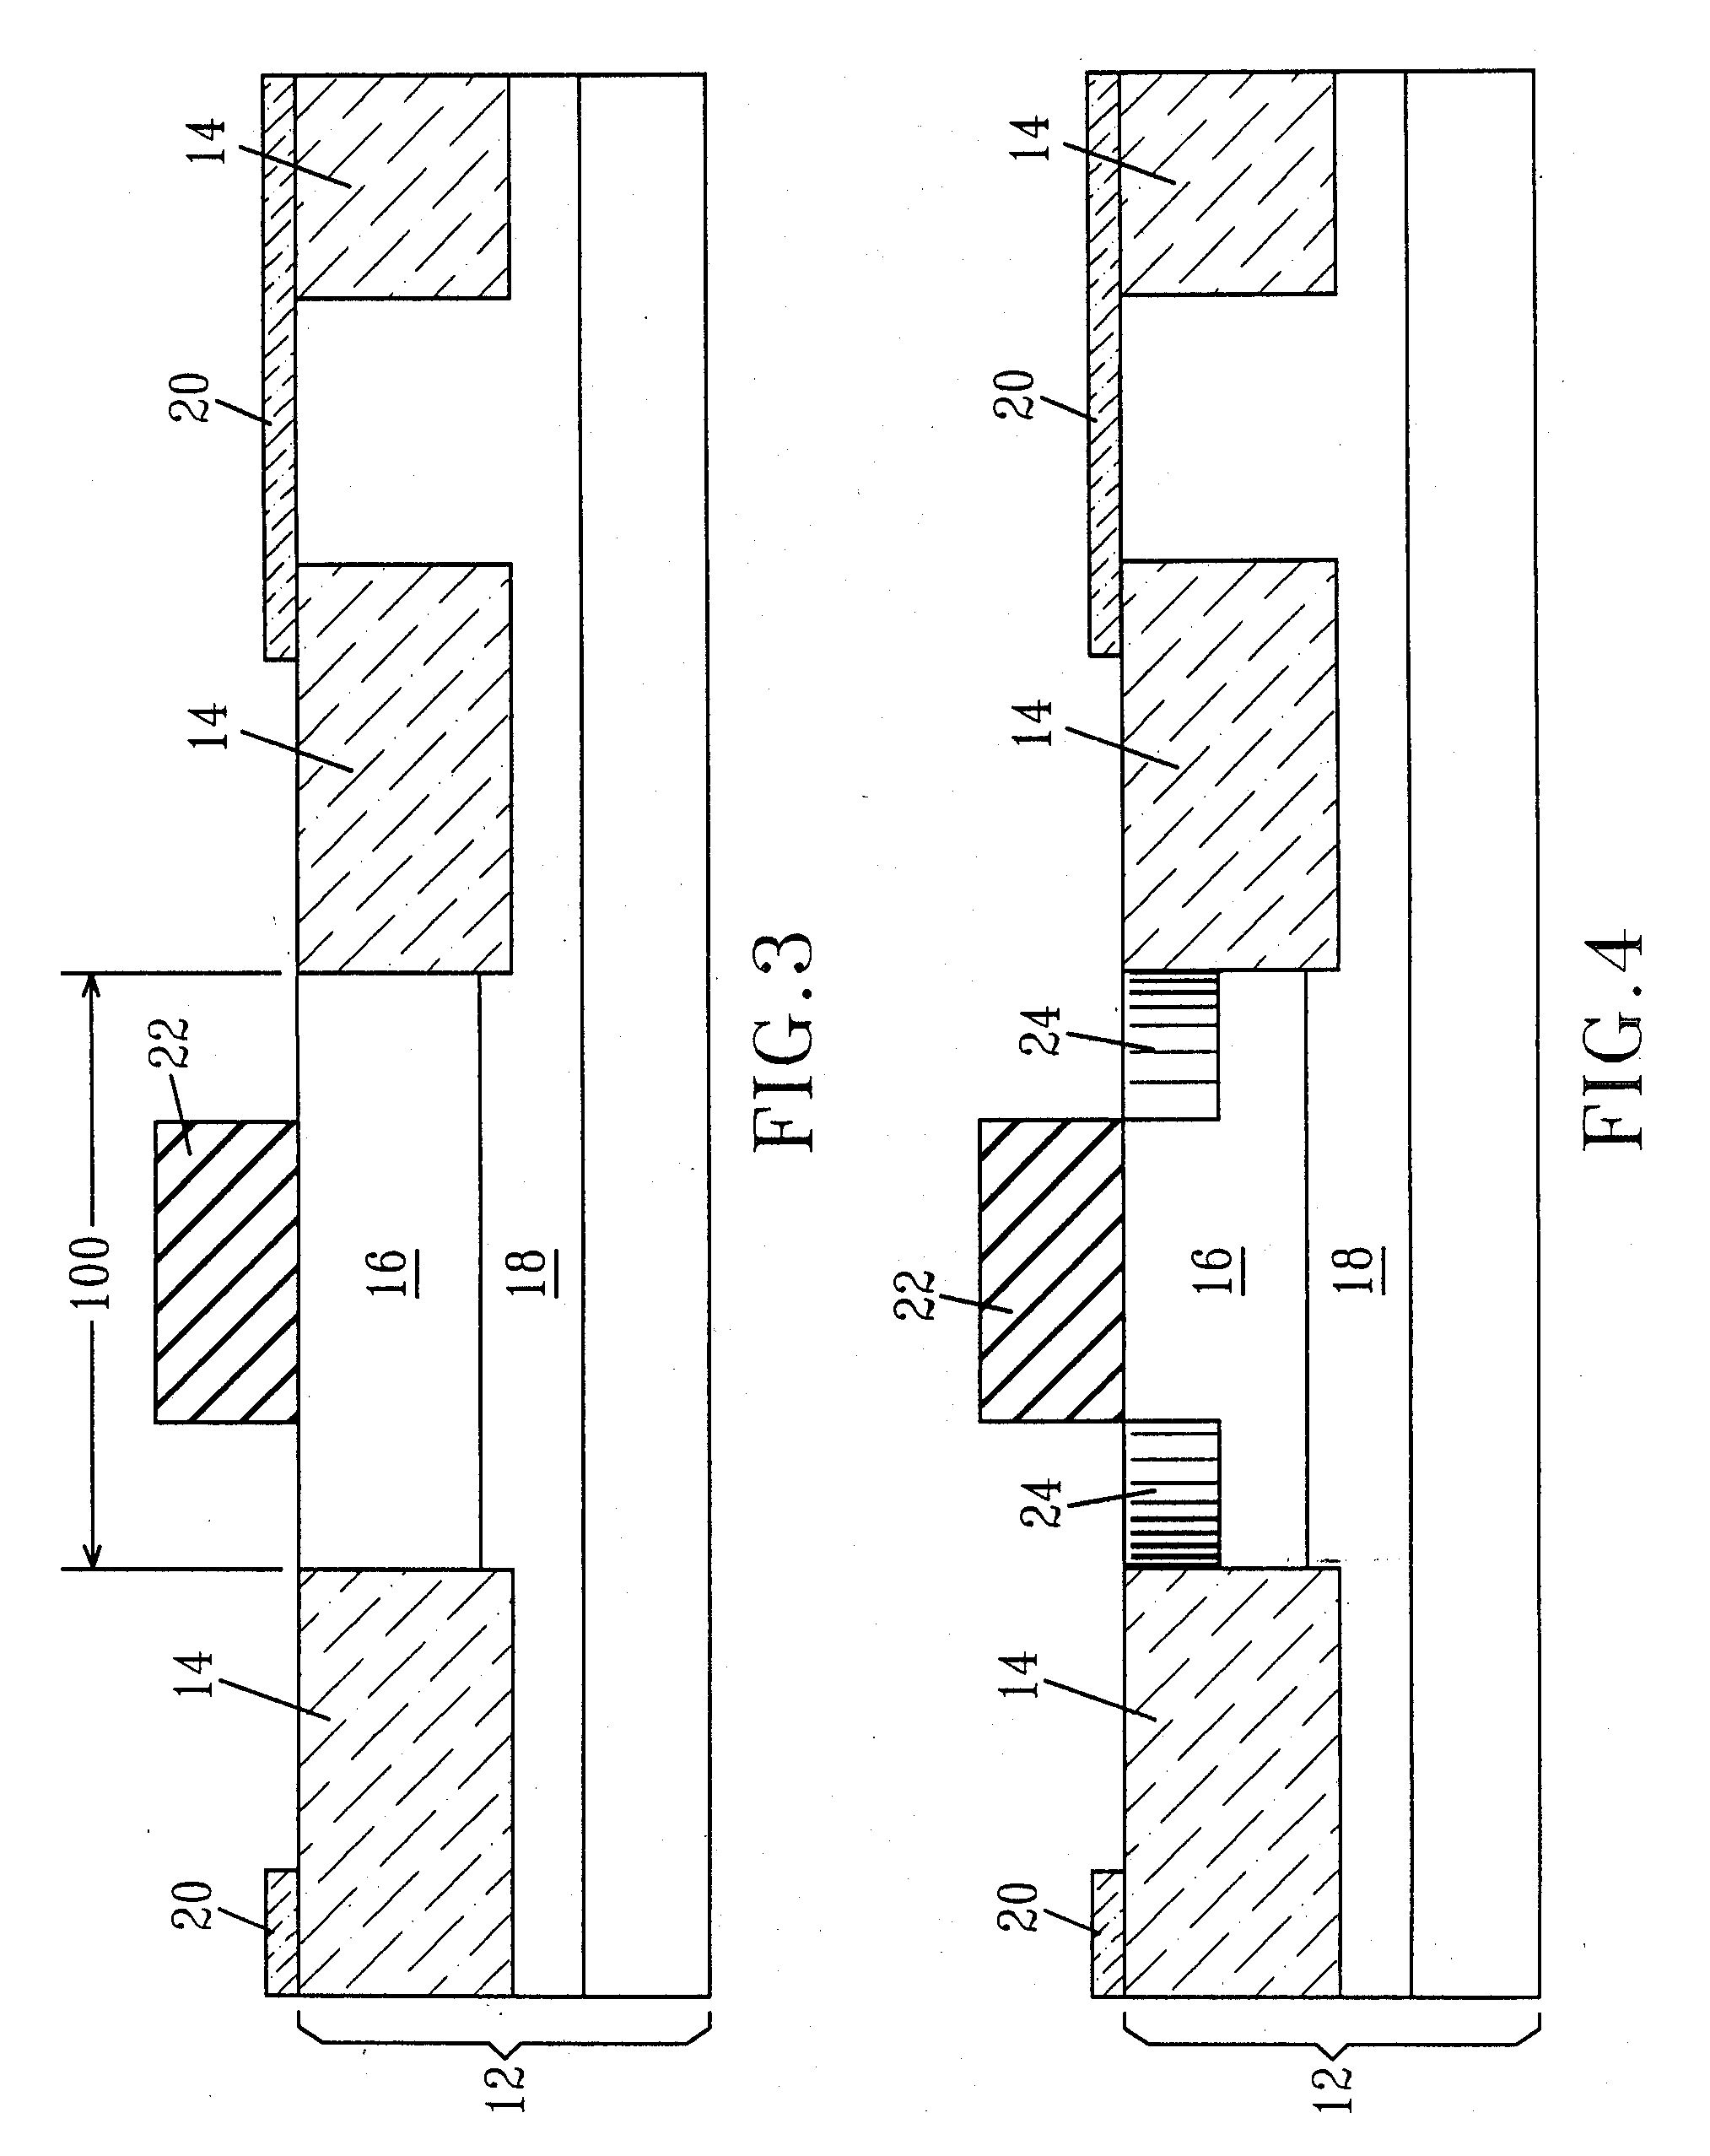 BIPOLAR TRANSISTOR WITH COLLECTOR HAVING AN EPITAXIAL Si:C REGION